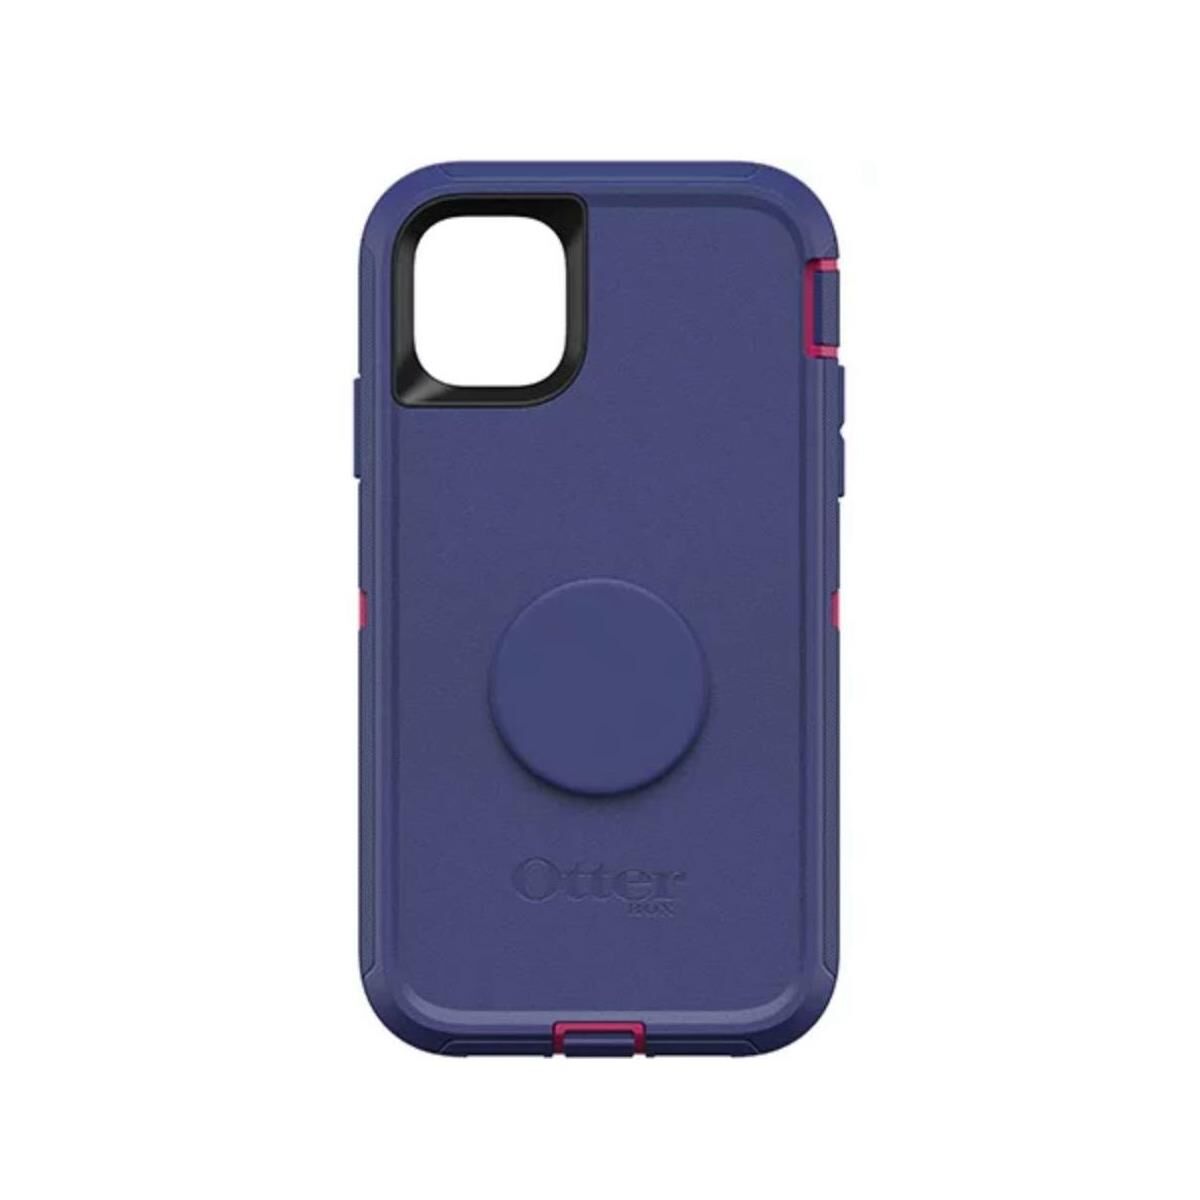 OtterBox Otter + Pop Defender Case for iPhone 11, Grape Jelly